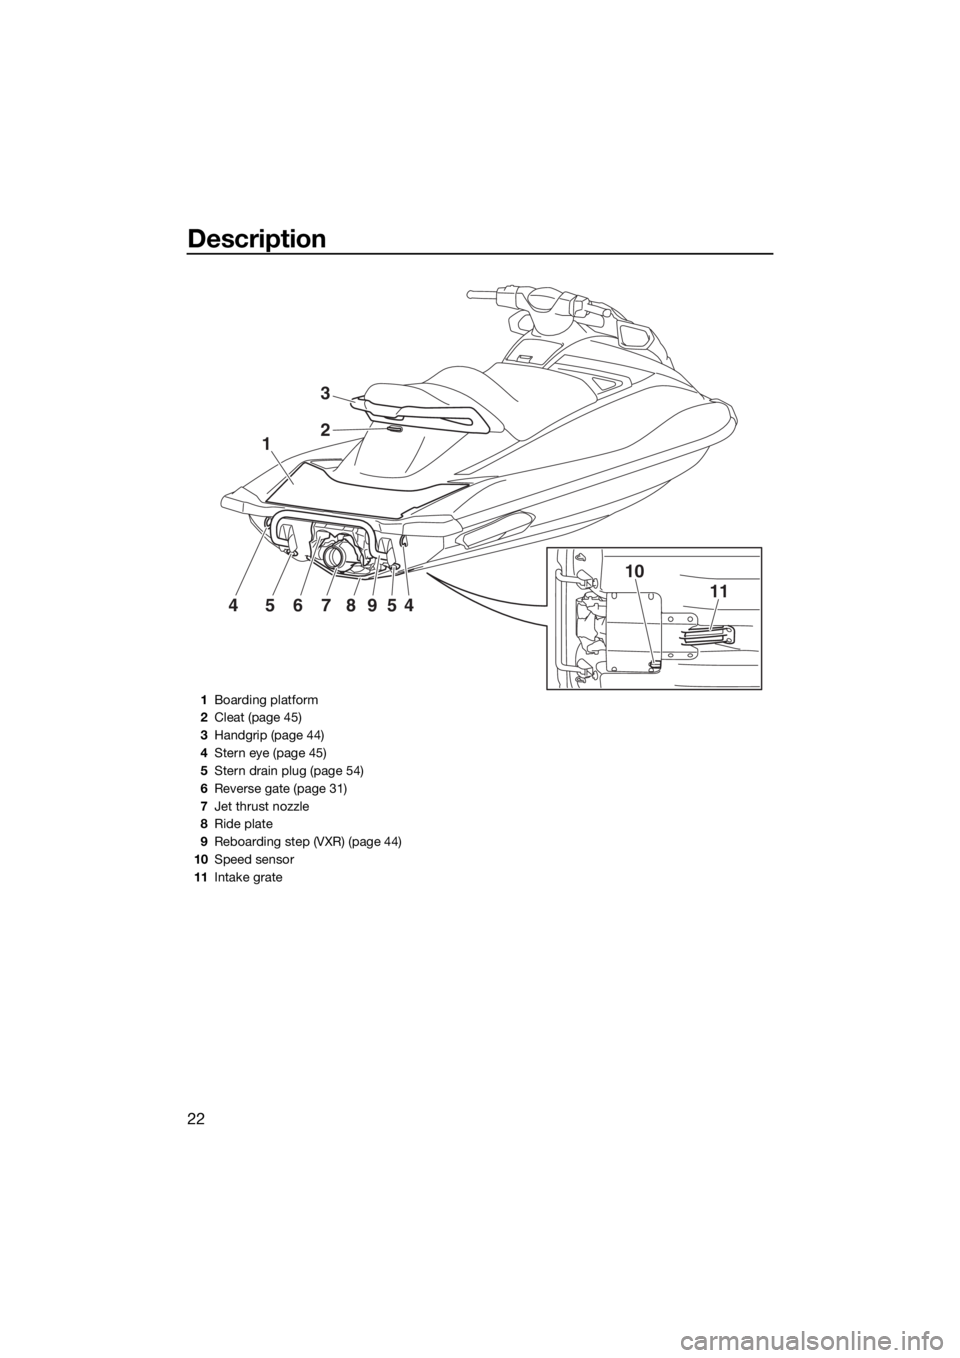 YAMAHA VXR 2015 Owners Manual Description
22
1
10
1145678954
2
3
1Boarding platform
2Cleat (page 45)
3Handgrip (page 44)
4Stern eye (page 45)
5Stern drain plug (page 54)
6Reverse gate (page 31)
7Jet thrust nozzle
8Ride plate
9Rebo